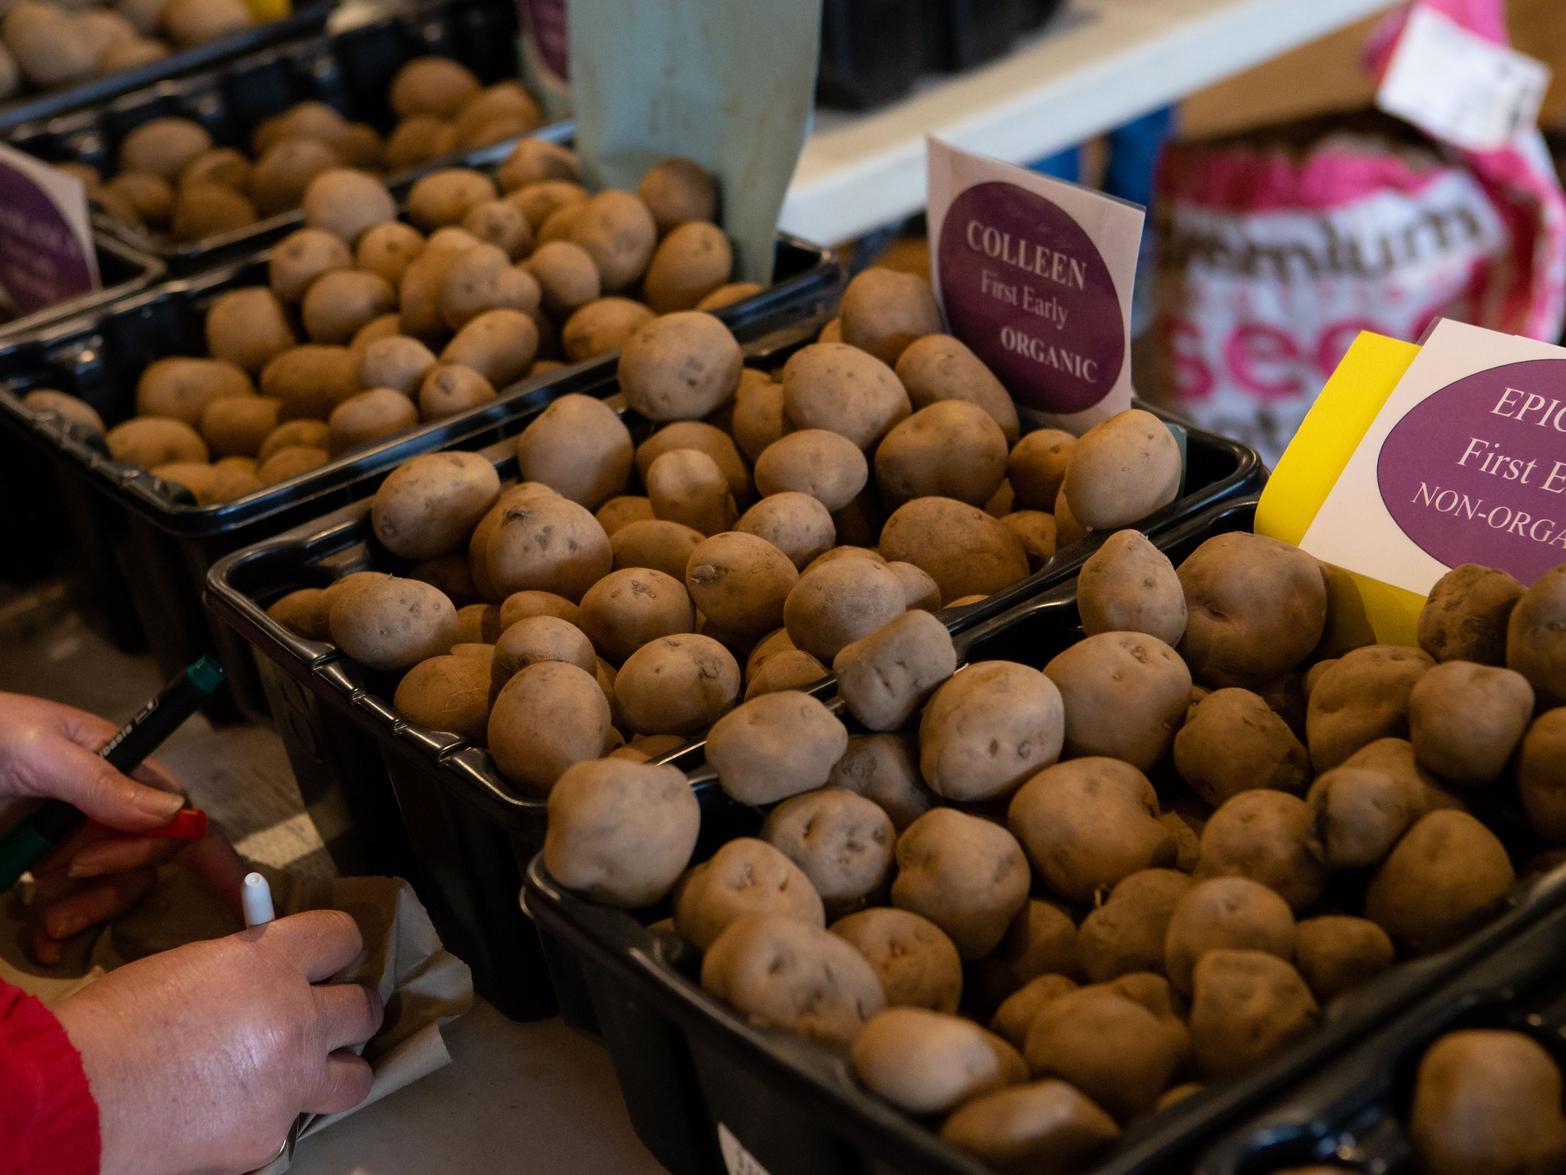 There were a variety of potatoes and other vegetation on offer at the annual event.